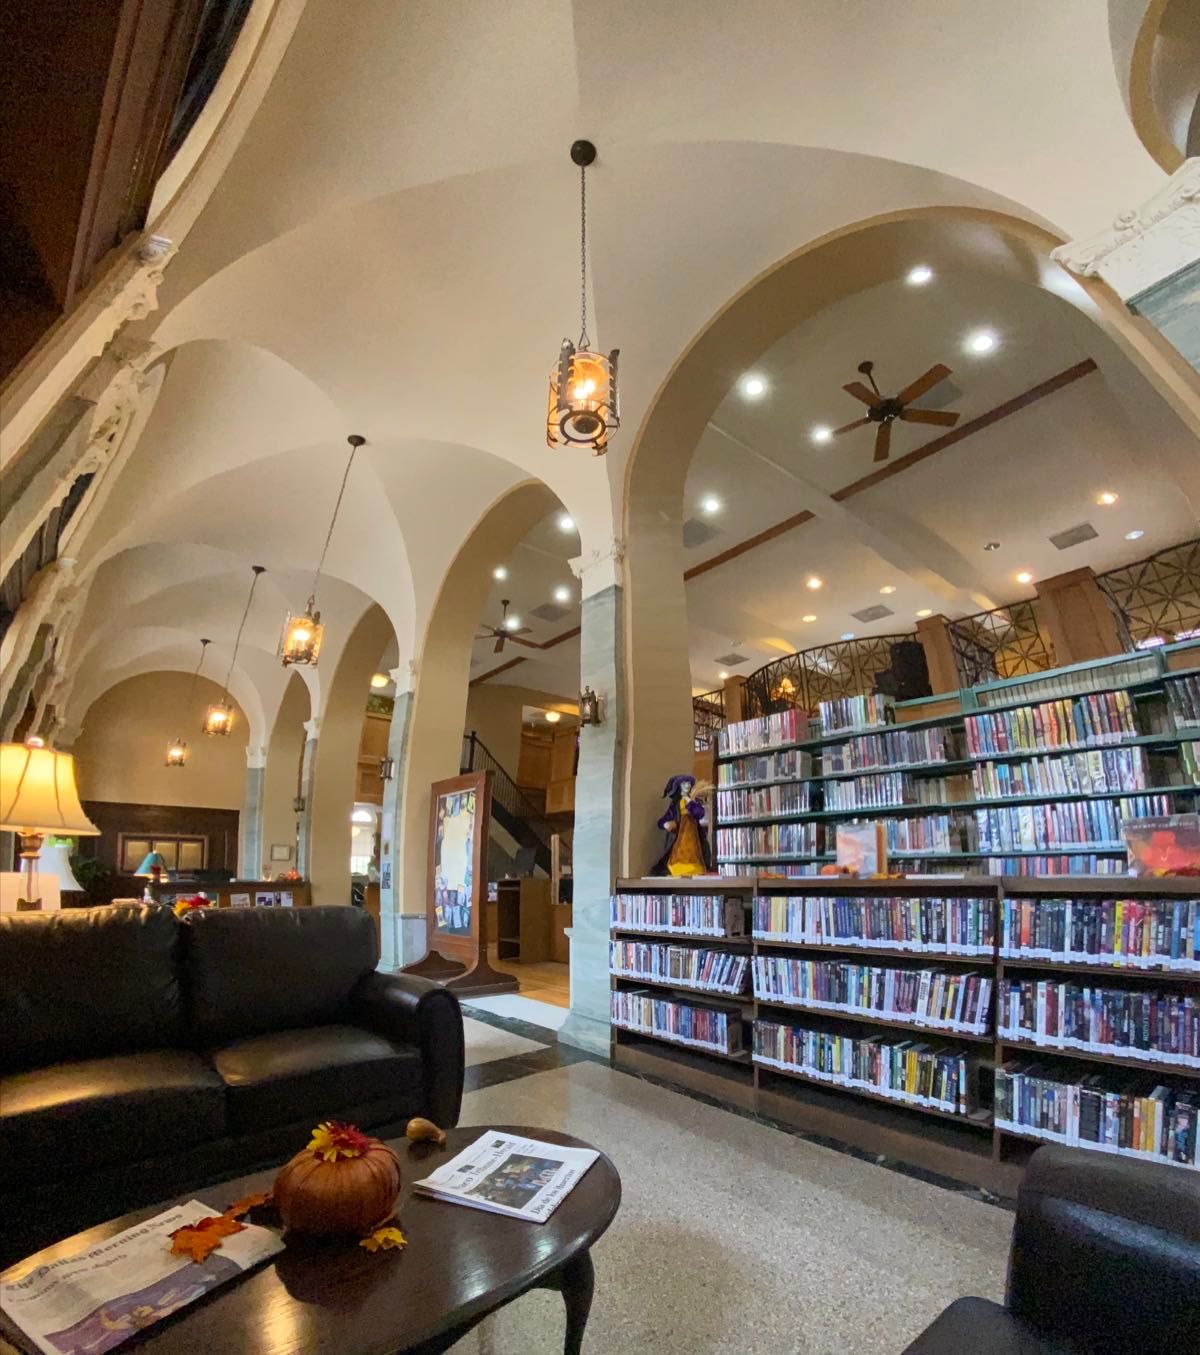 interior of hillsboro public library in hillsboro texas. was an old post office. beautiful high renaissance architecture and unusual for small town libraries.